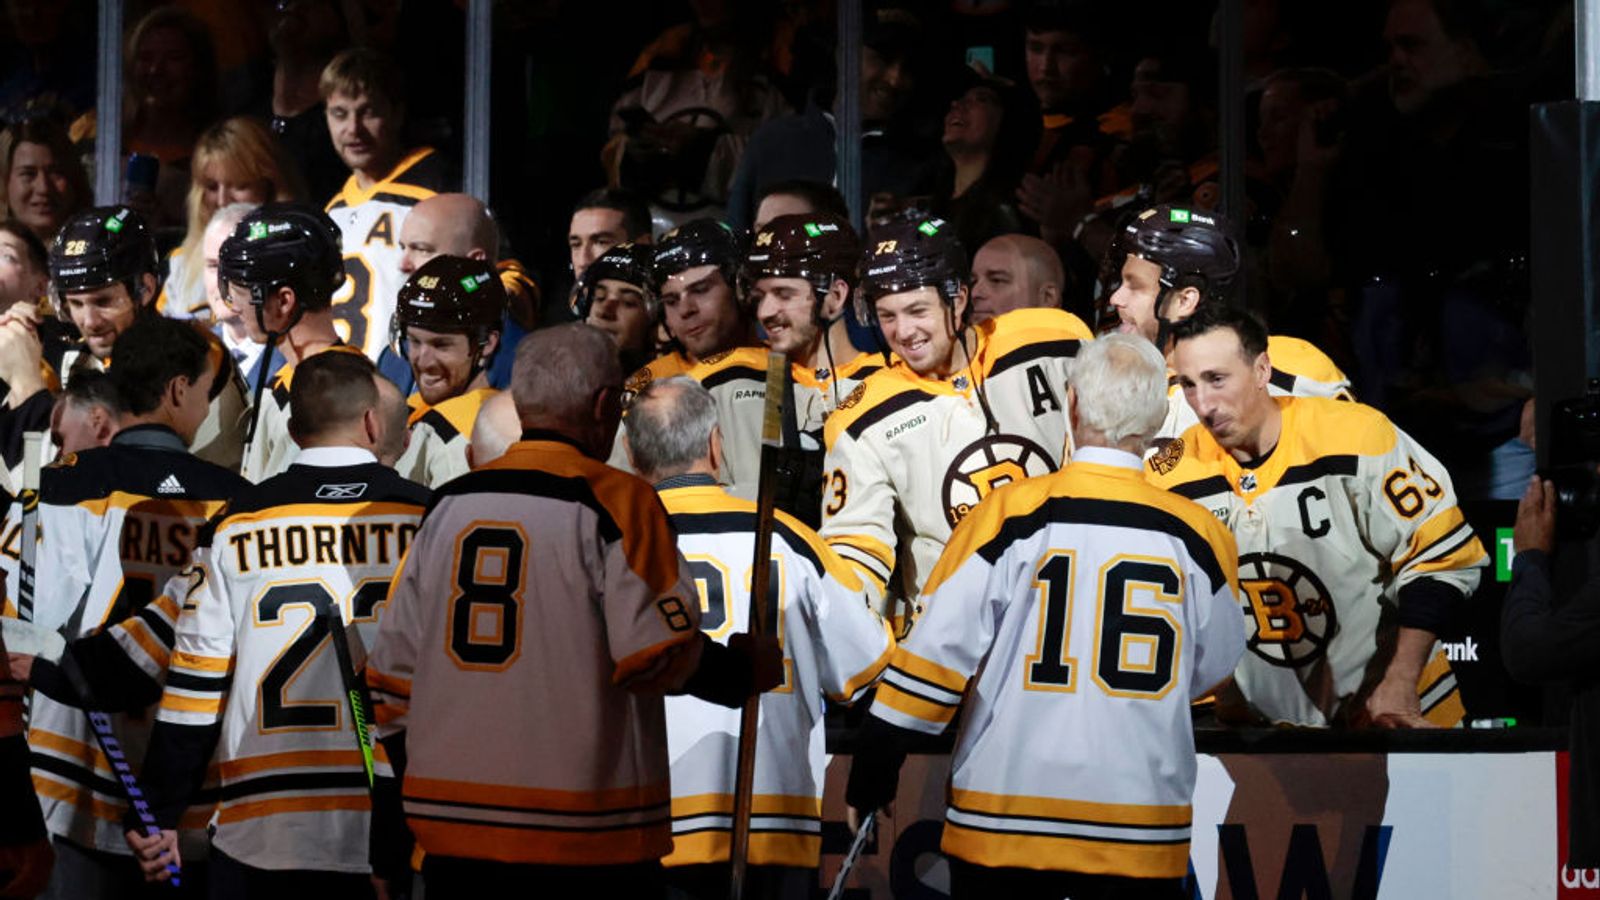 Six questions as Bruins turn 100